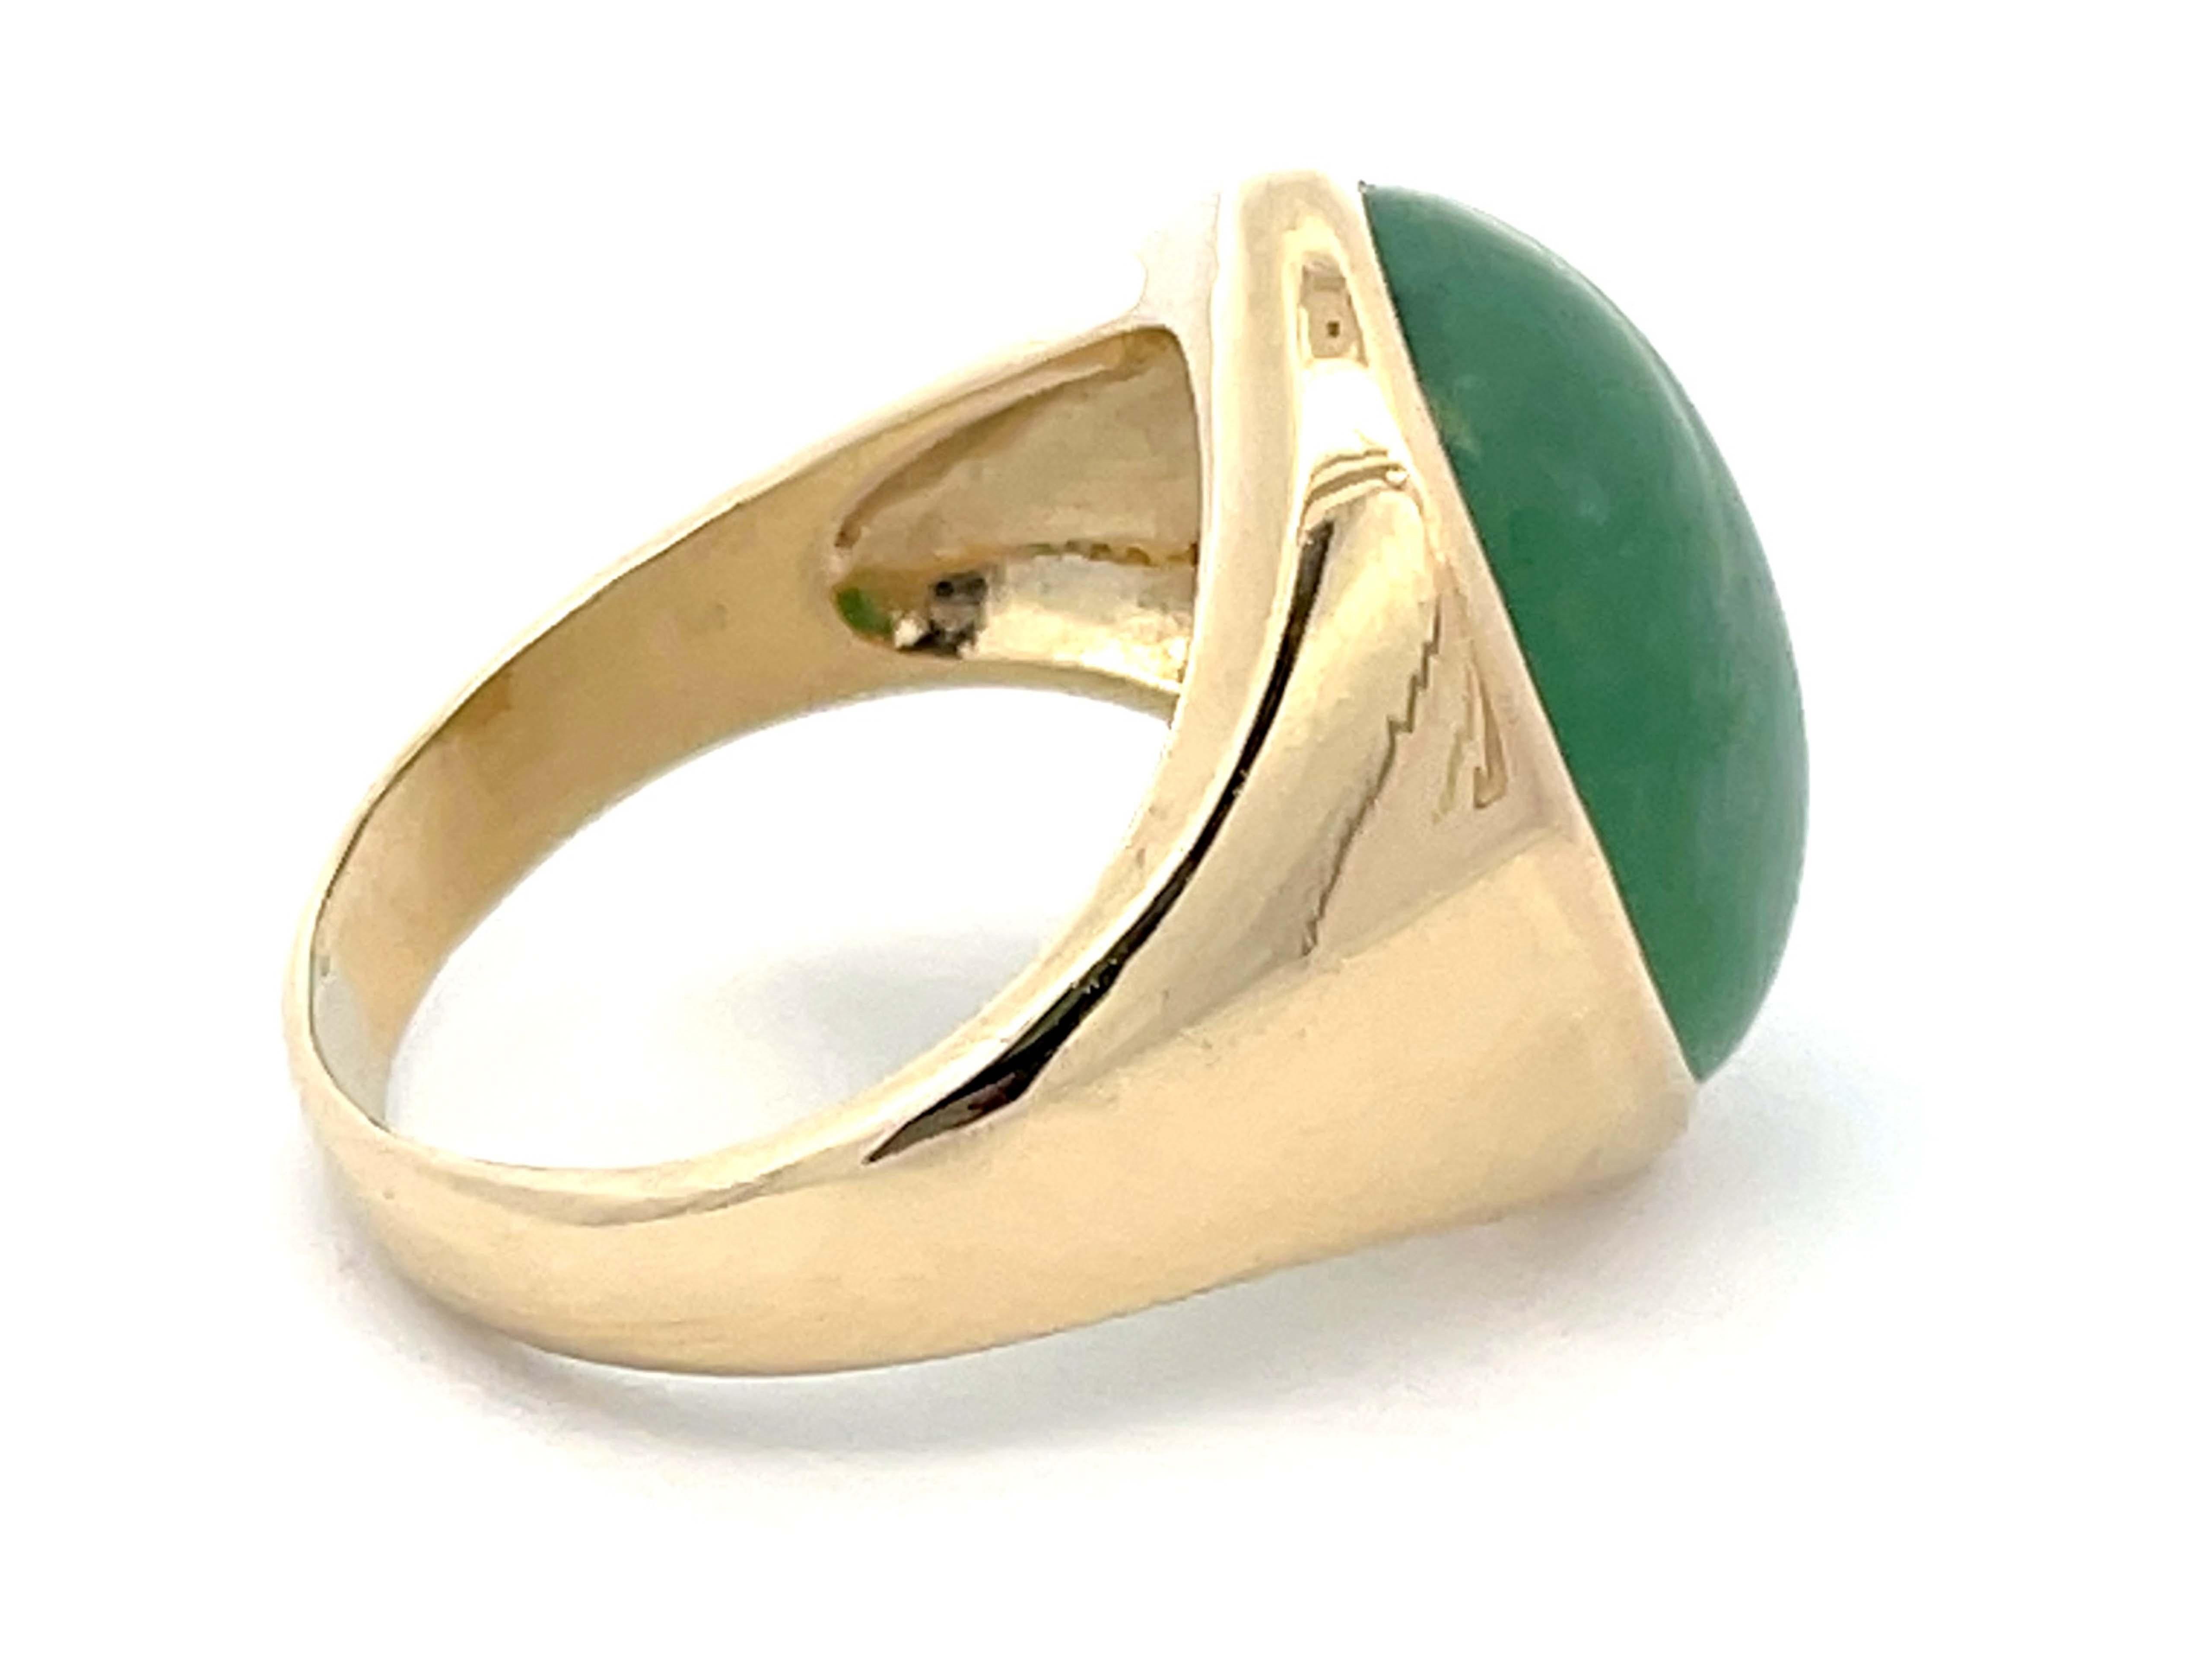 21 Carat Oval Cabochon Green Jade Ring in 14k Yellow Gold For Sale 1